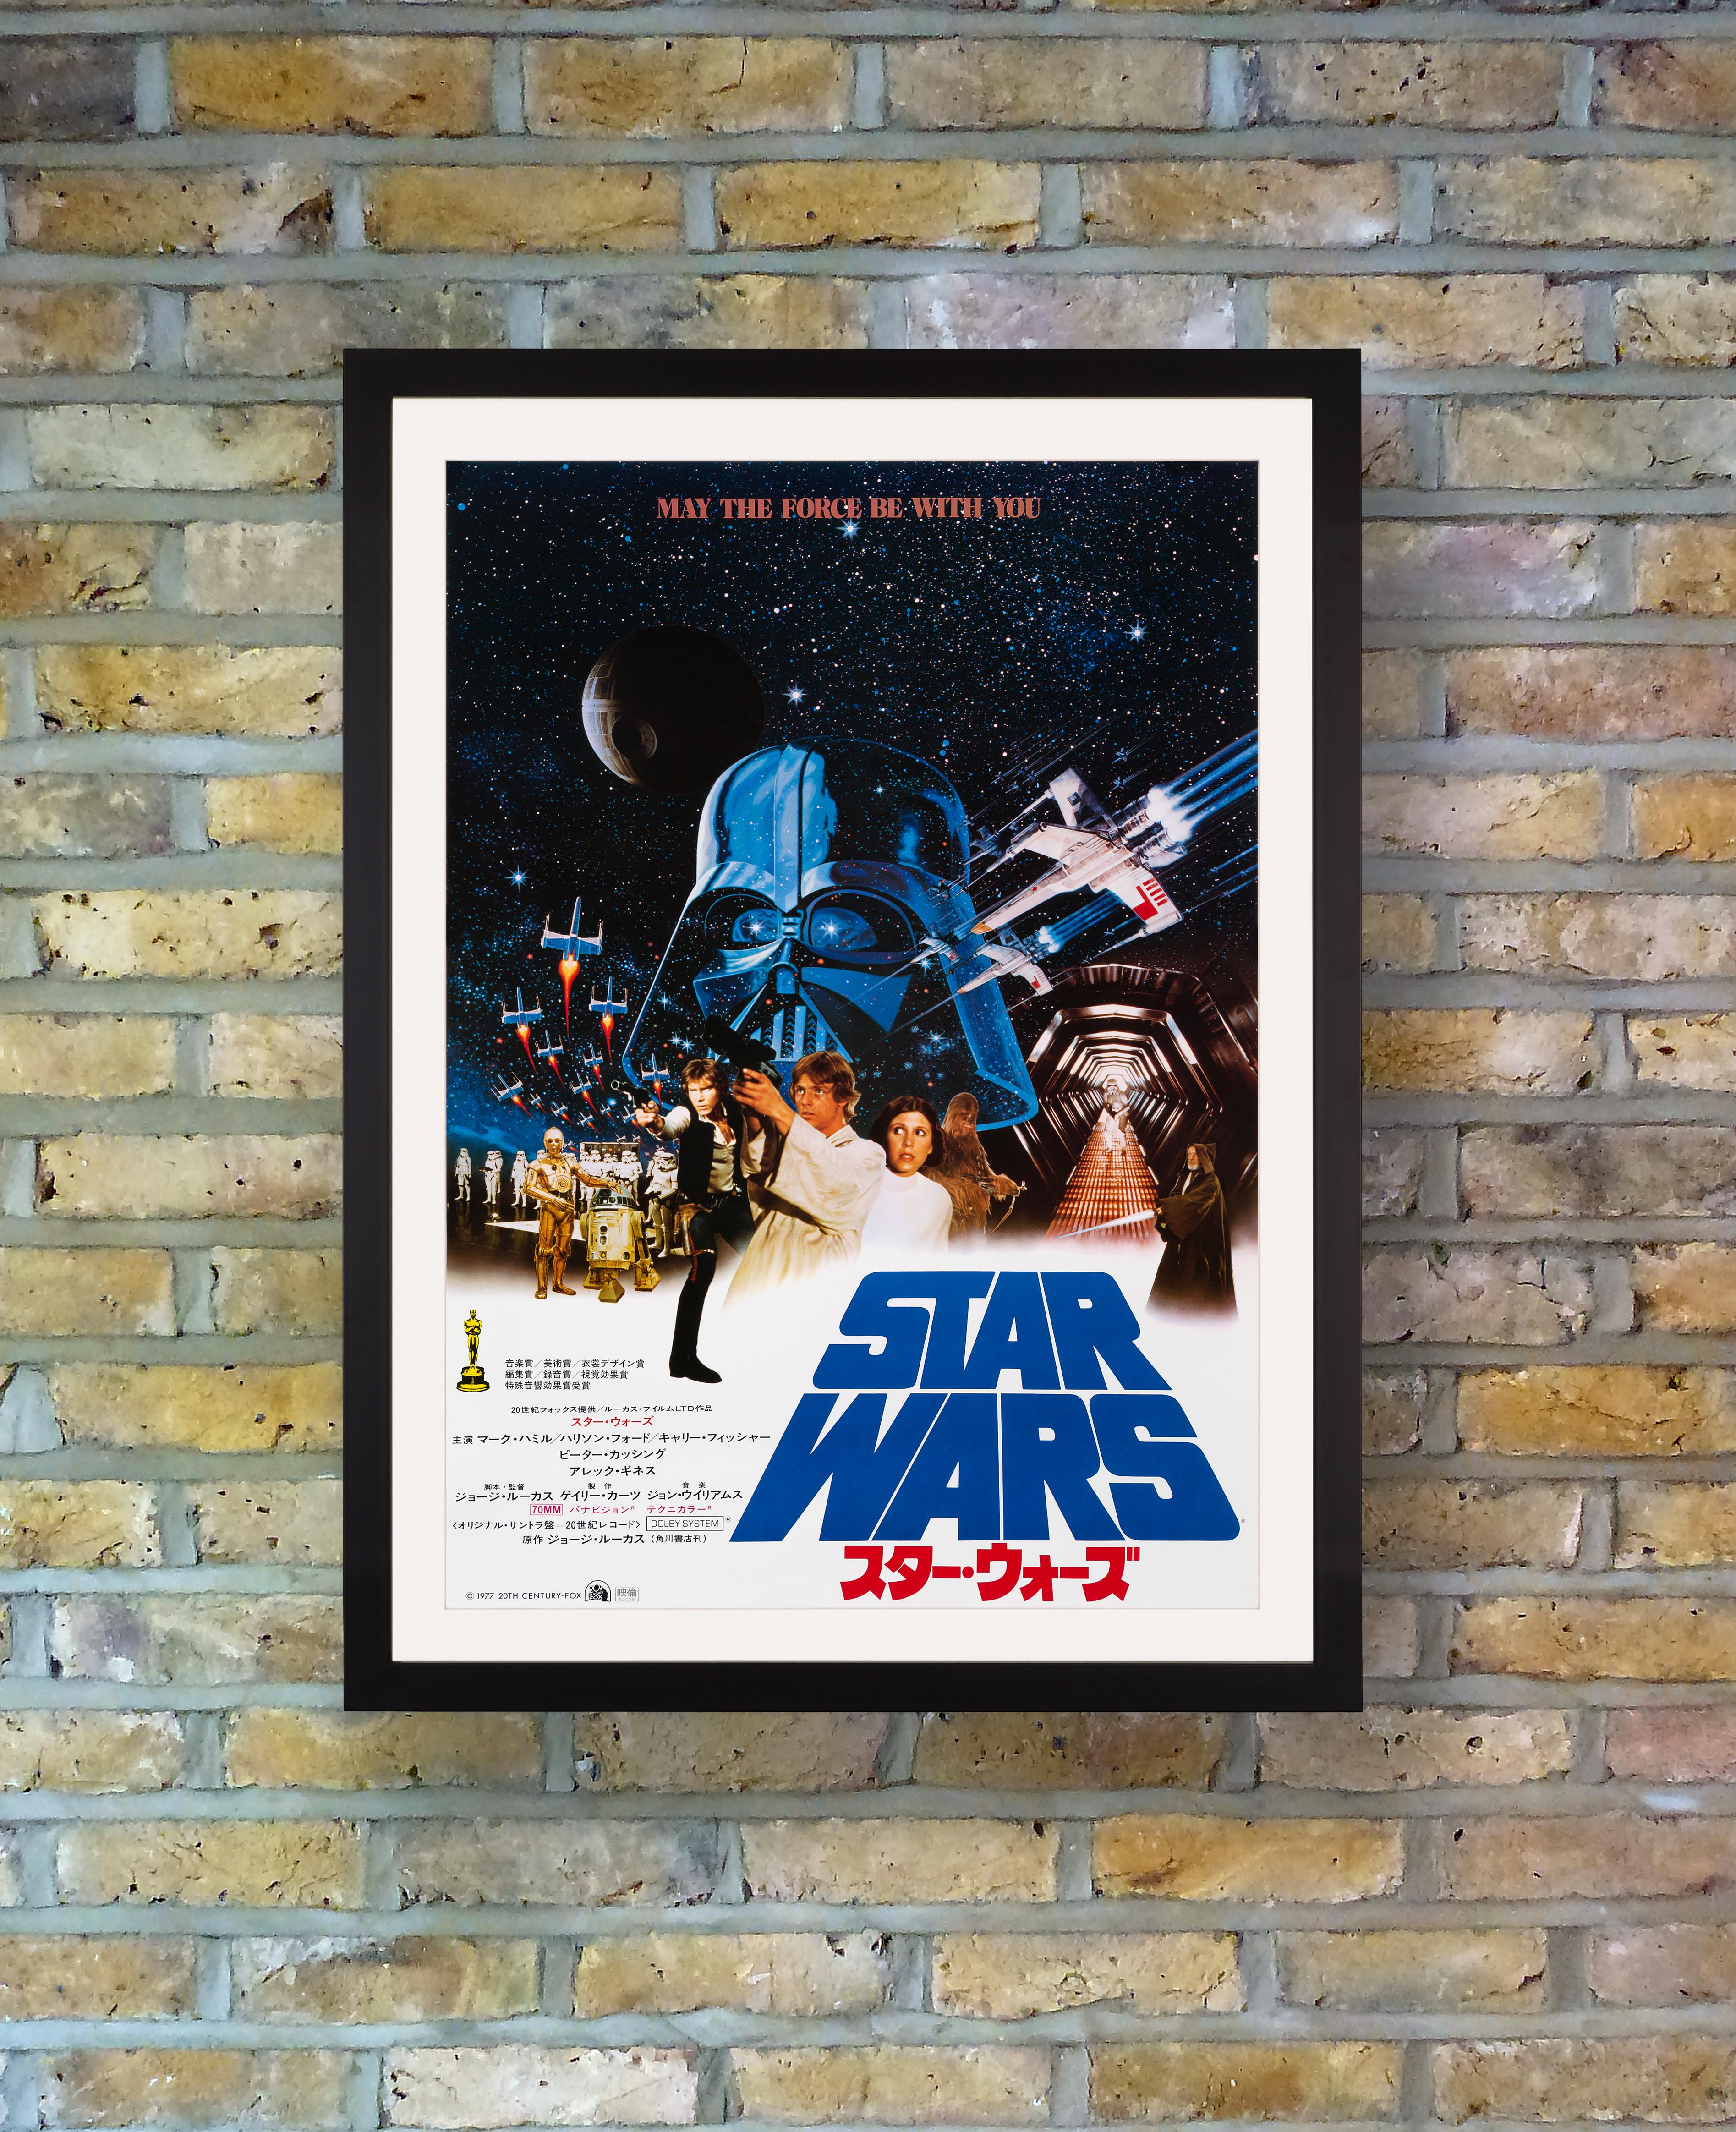 Featuring a montage of Tom Jung's and the Hildebrandt brothers' designs for the US poster campaign, this poster was issued for the first release of 'Star Wars' in Japan in 1978. Later retitled 'Star Wars: Episode IV - A New Hope,' George Lucas' 1977